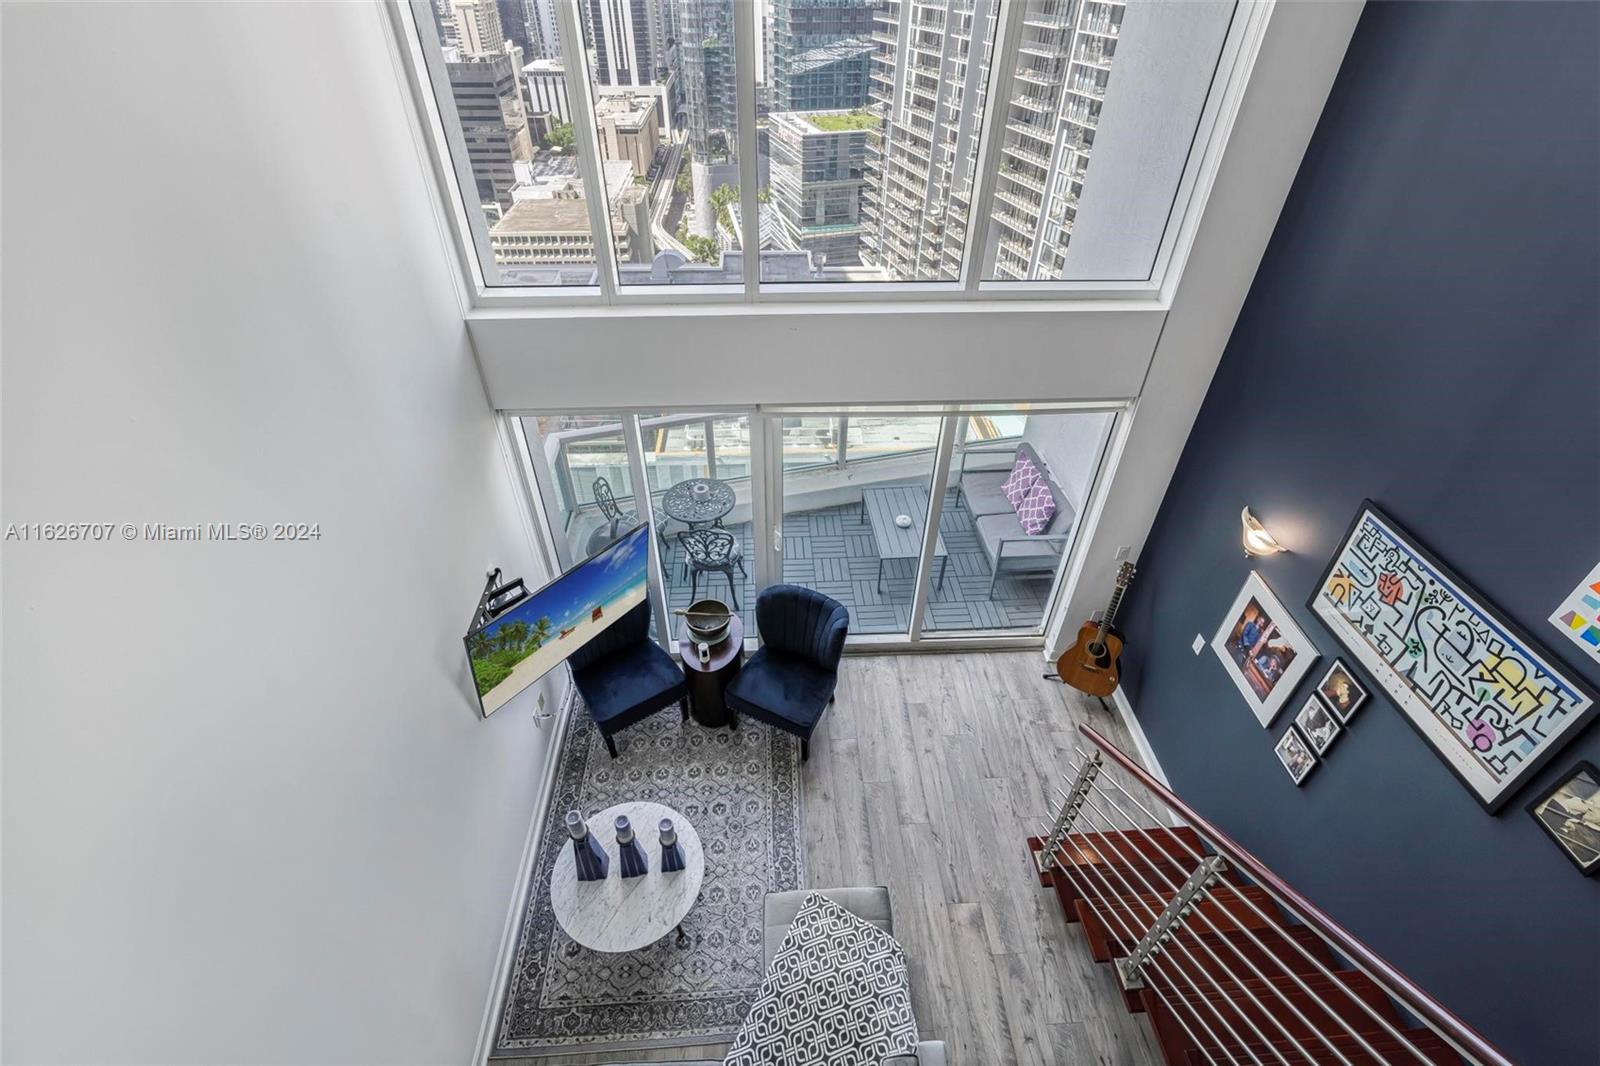 Experience the best of Brickell living in this stunning 2-story loft-style condo with unobstructed views. This 1-bedroom, 1.5-bathroom residence offers breathtaking panoramic city & Miami River views. The expansive floor-to-ceiling impact glass windows fill the open floor plan with natural light, creating a bright & inviting atmosphere. The modern kitchen boasts stainless steel appliances installed in 2022.

Step outside and find yourself within walking distance of top-rated restaurants, Brickell City Center, Mary Brickell Village, and vibrant entertainment venues. 

Enjoy full-service amenities, including two pools with sunrise and sunset views, a 3-story fitness center, a business center, a jacuzzi, a sauna/steam room, club rooms, and a 24-hour concierge.